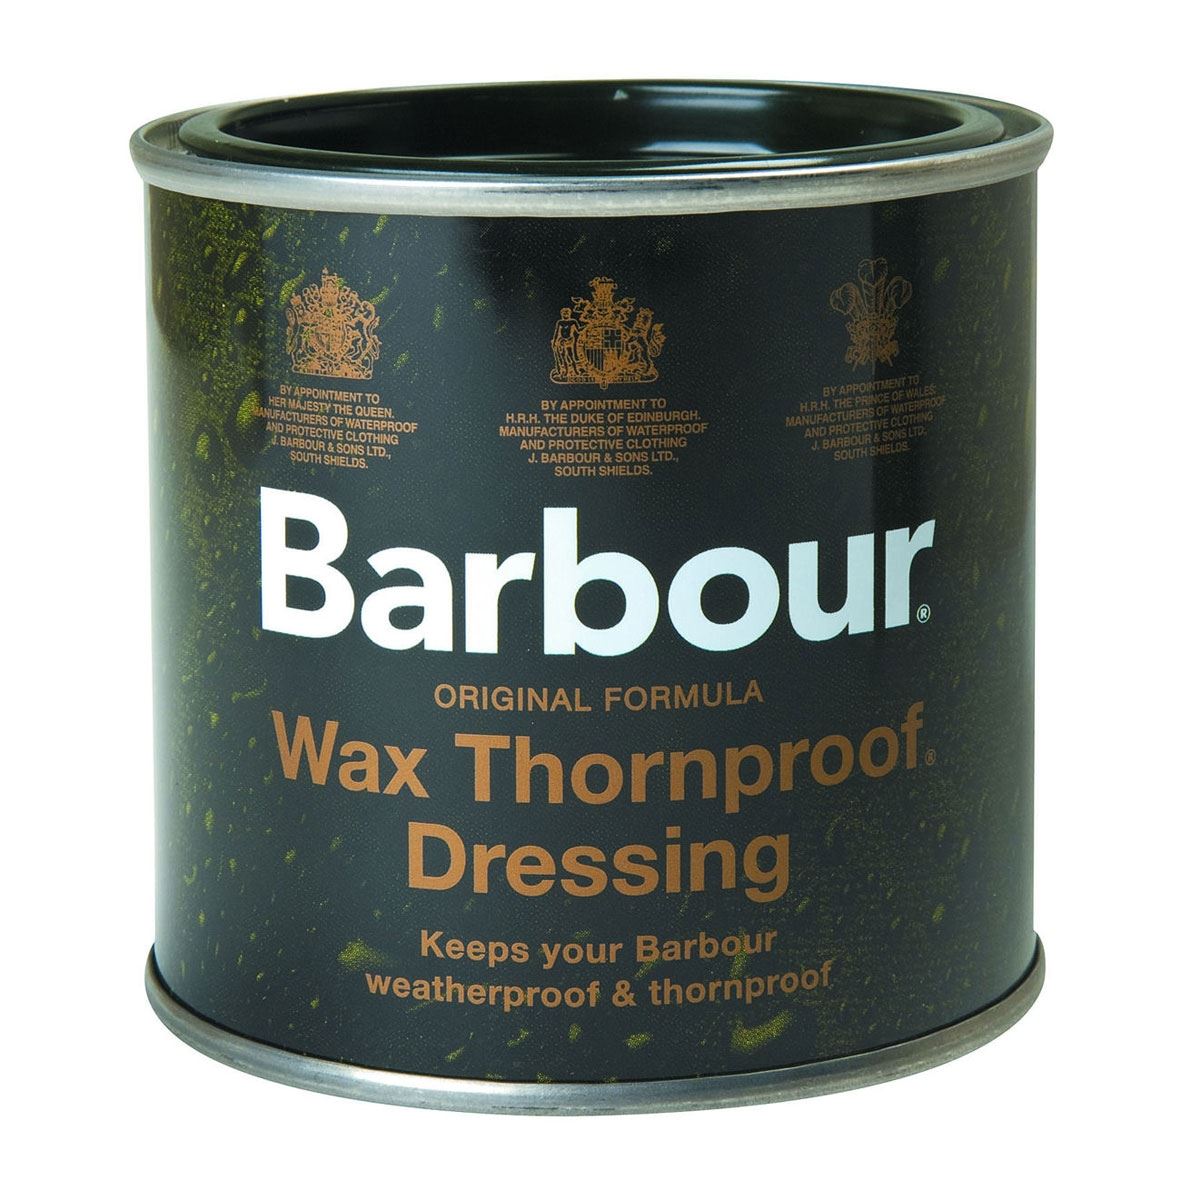 What are the dimensions of the Barbour wax tin?